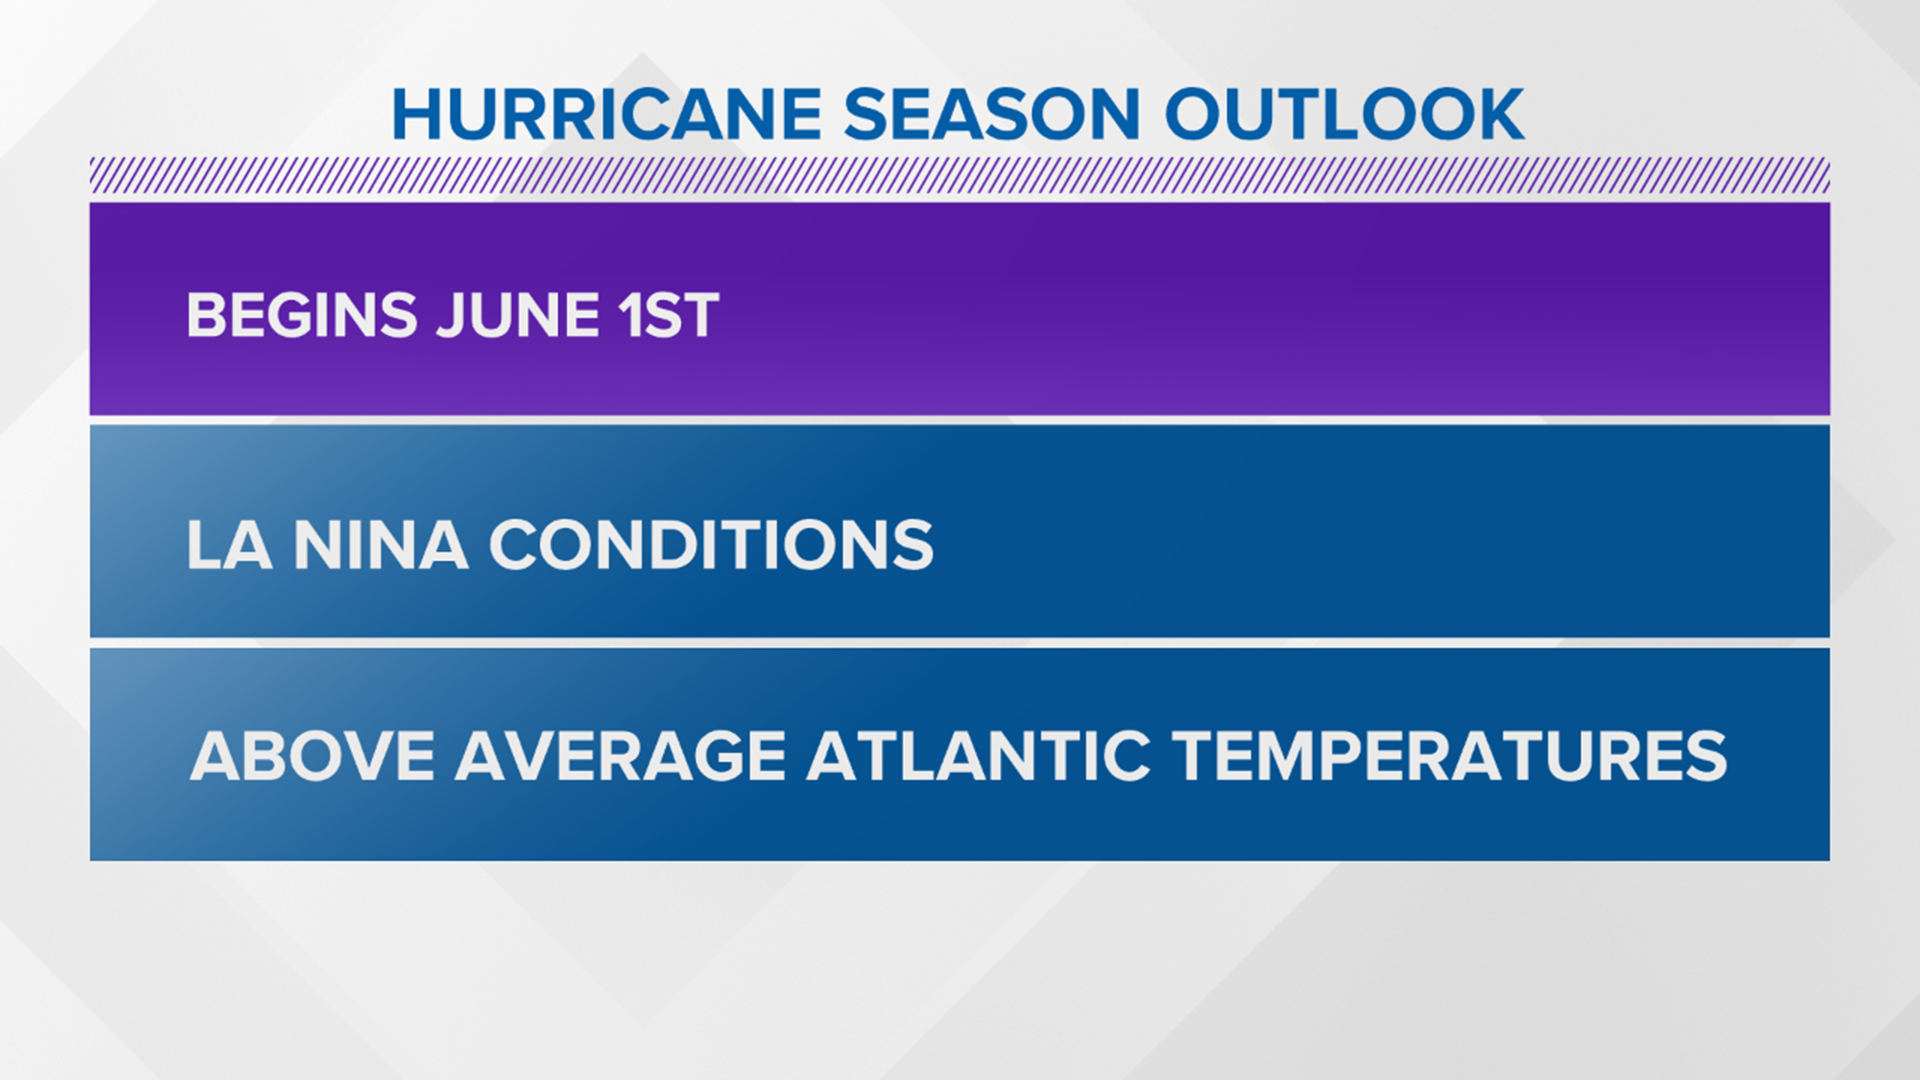 With the 2020 Atlantic Hurricane Season starting in two weeks, we're taking a look at several weather conditions and analyzing when the season generally peaks.